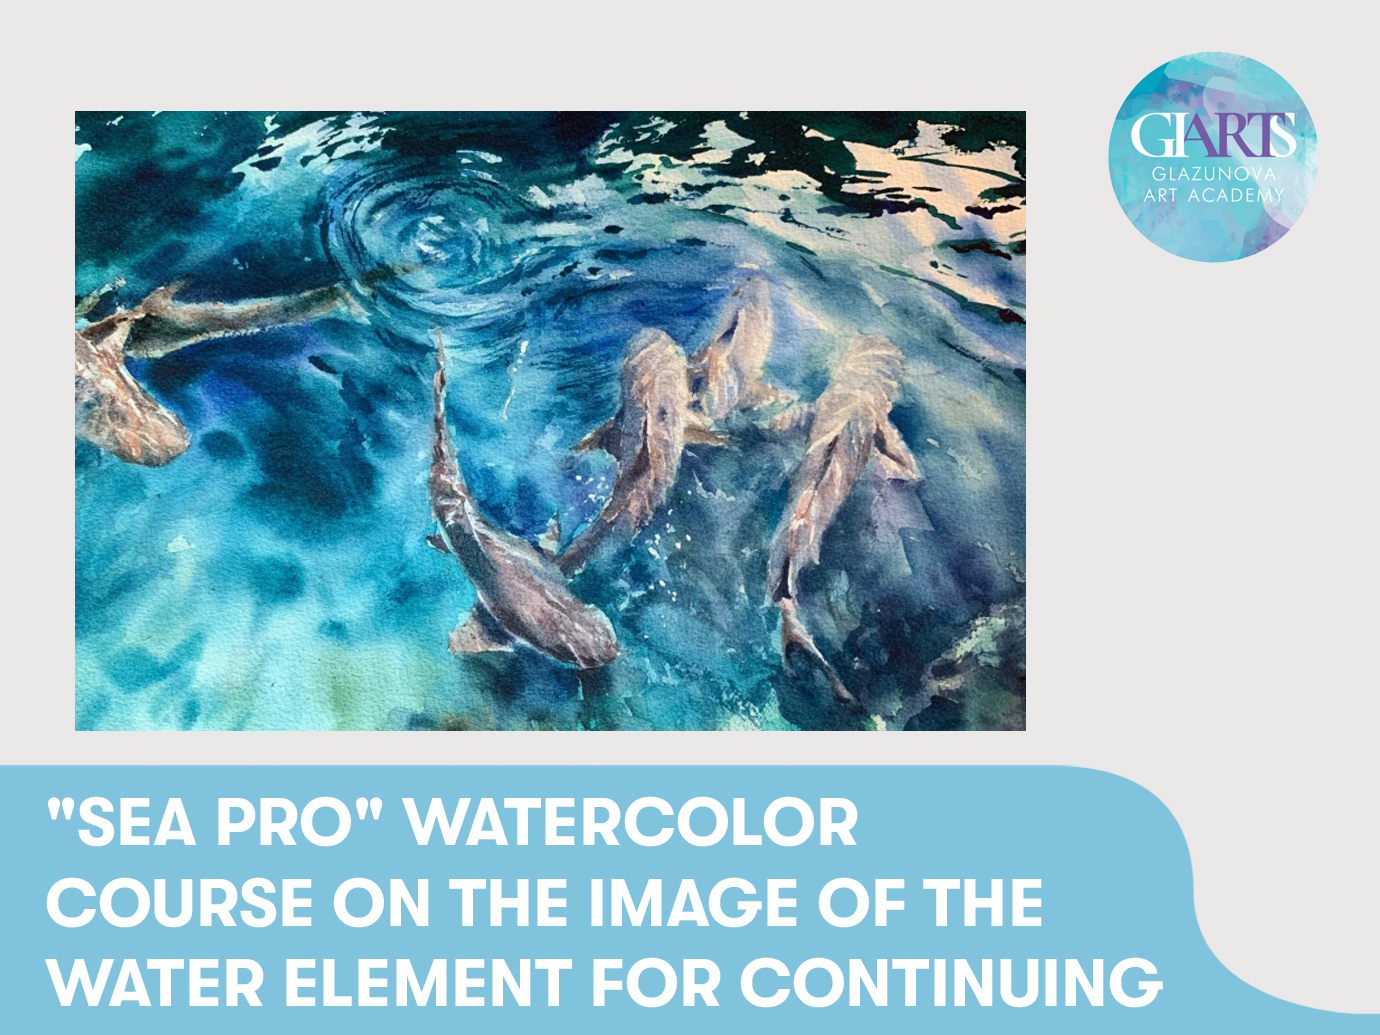 “Sea PRO“ Watercolor course on the image of the water element for continuing